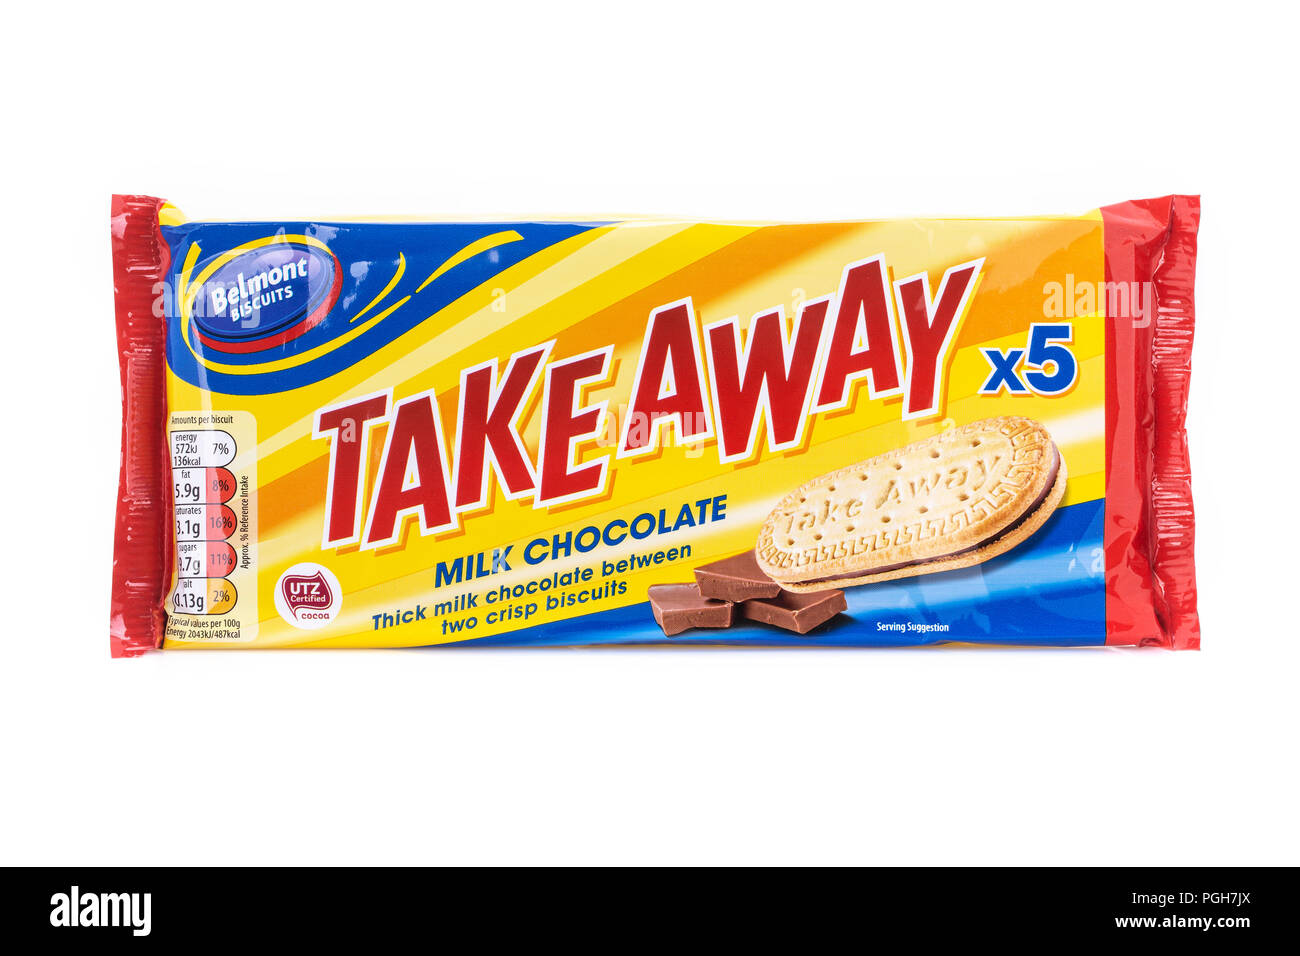 SWINDON, UK - AUGUST 19, 2018: Packet of Belmont Take Away Milk Chocolate Biscuits on a White Background. Stock Photo